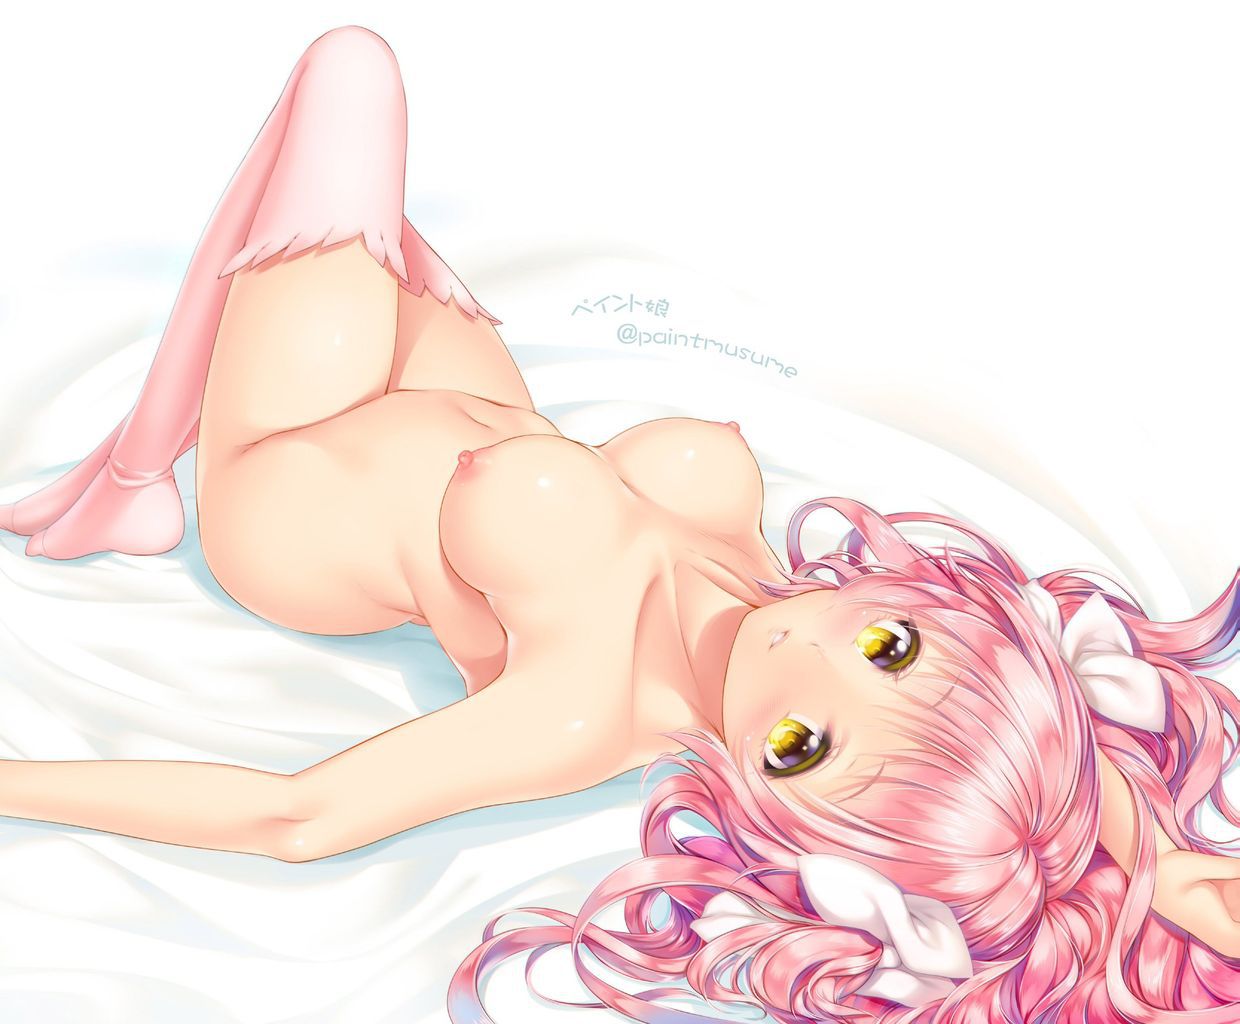 Image that a girl with pink hair is insanely [secondary erotic] 22